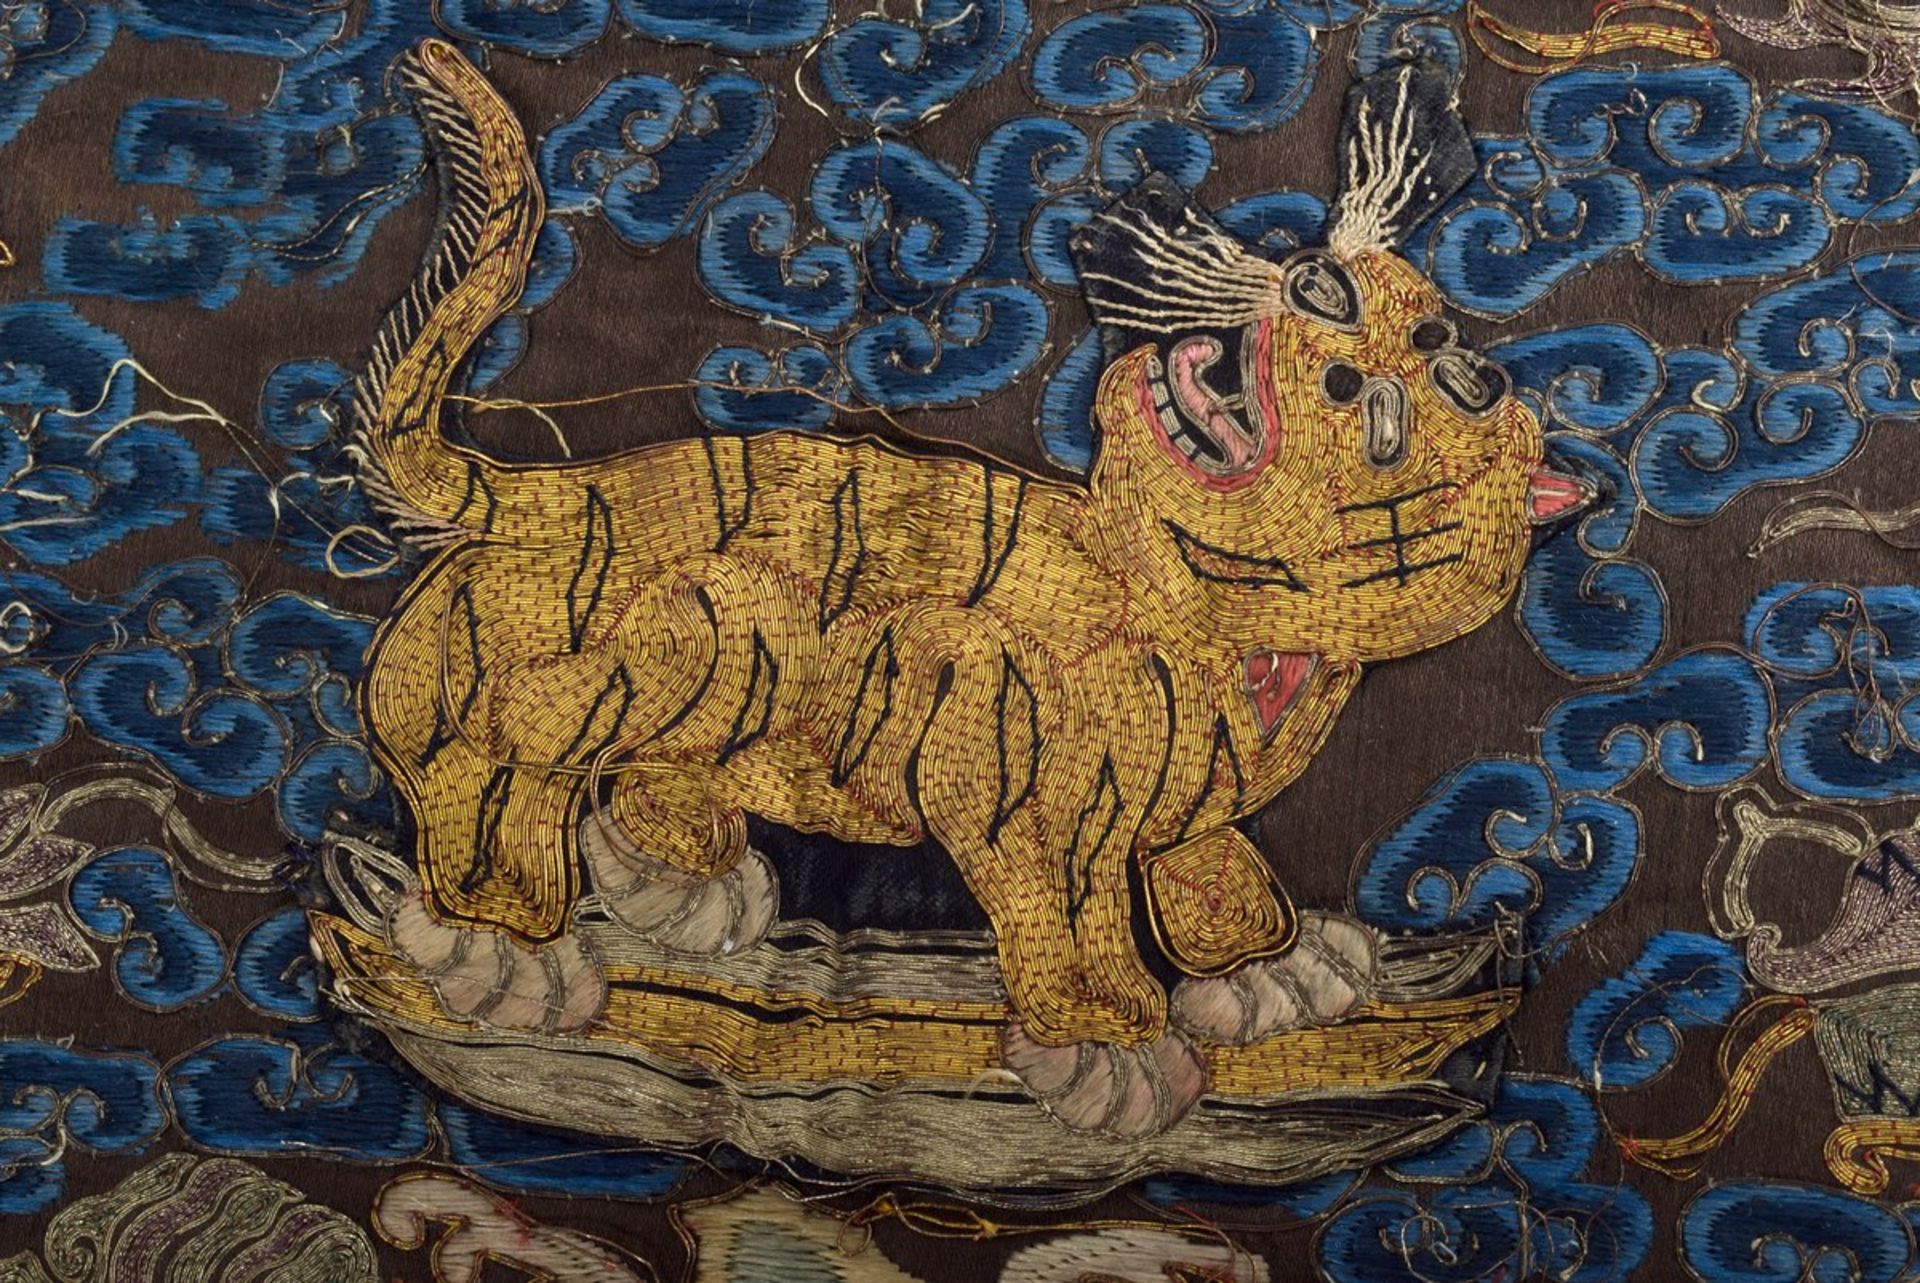 Mandarin insignia "Tiger", 4th military rank, Qing Dynasty, China 19th century, silk with gold thre - Image 3 of 7